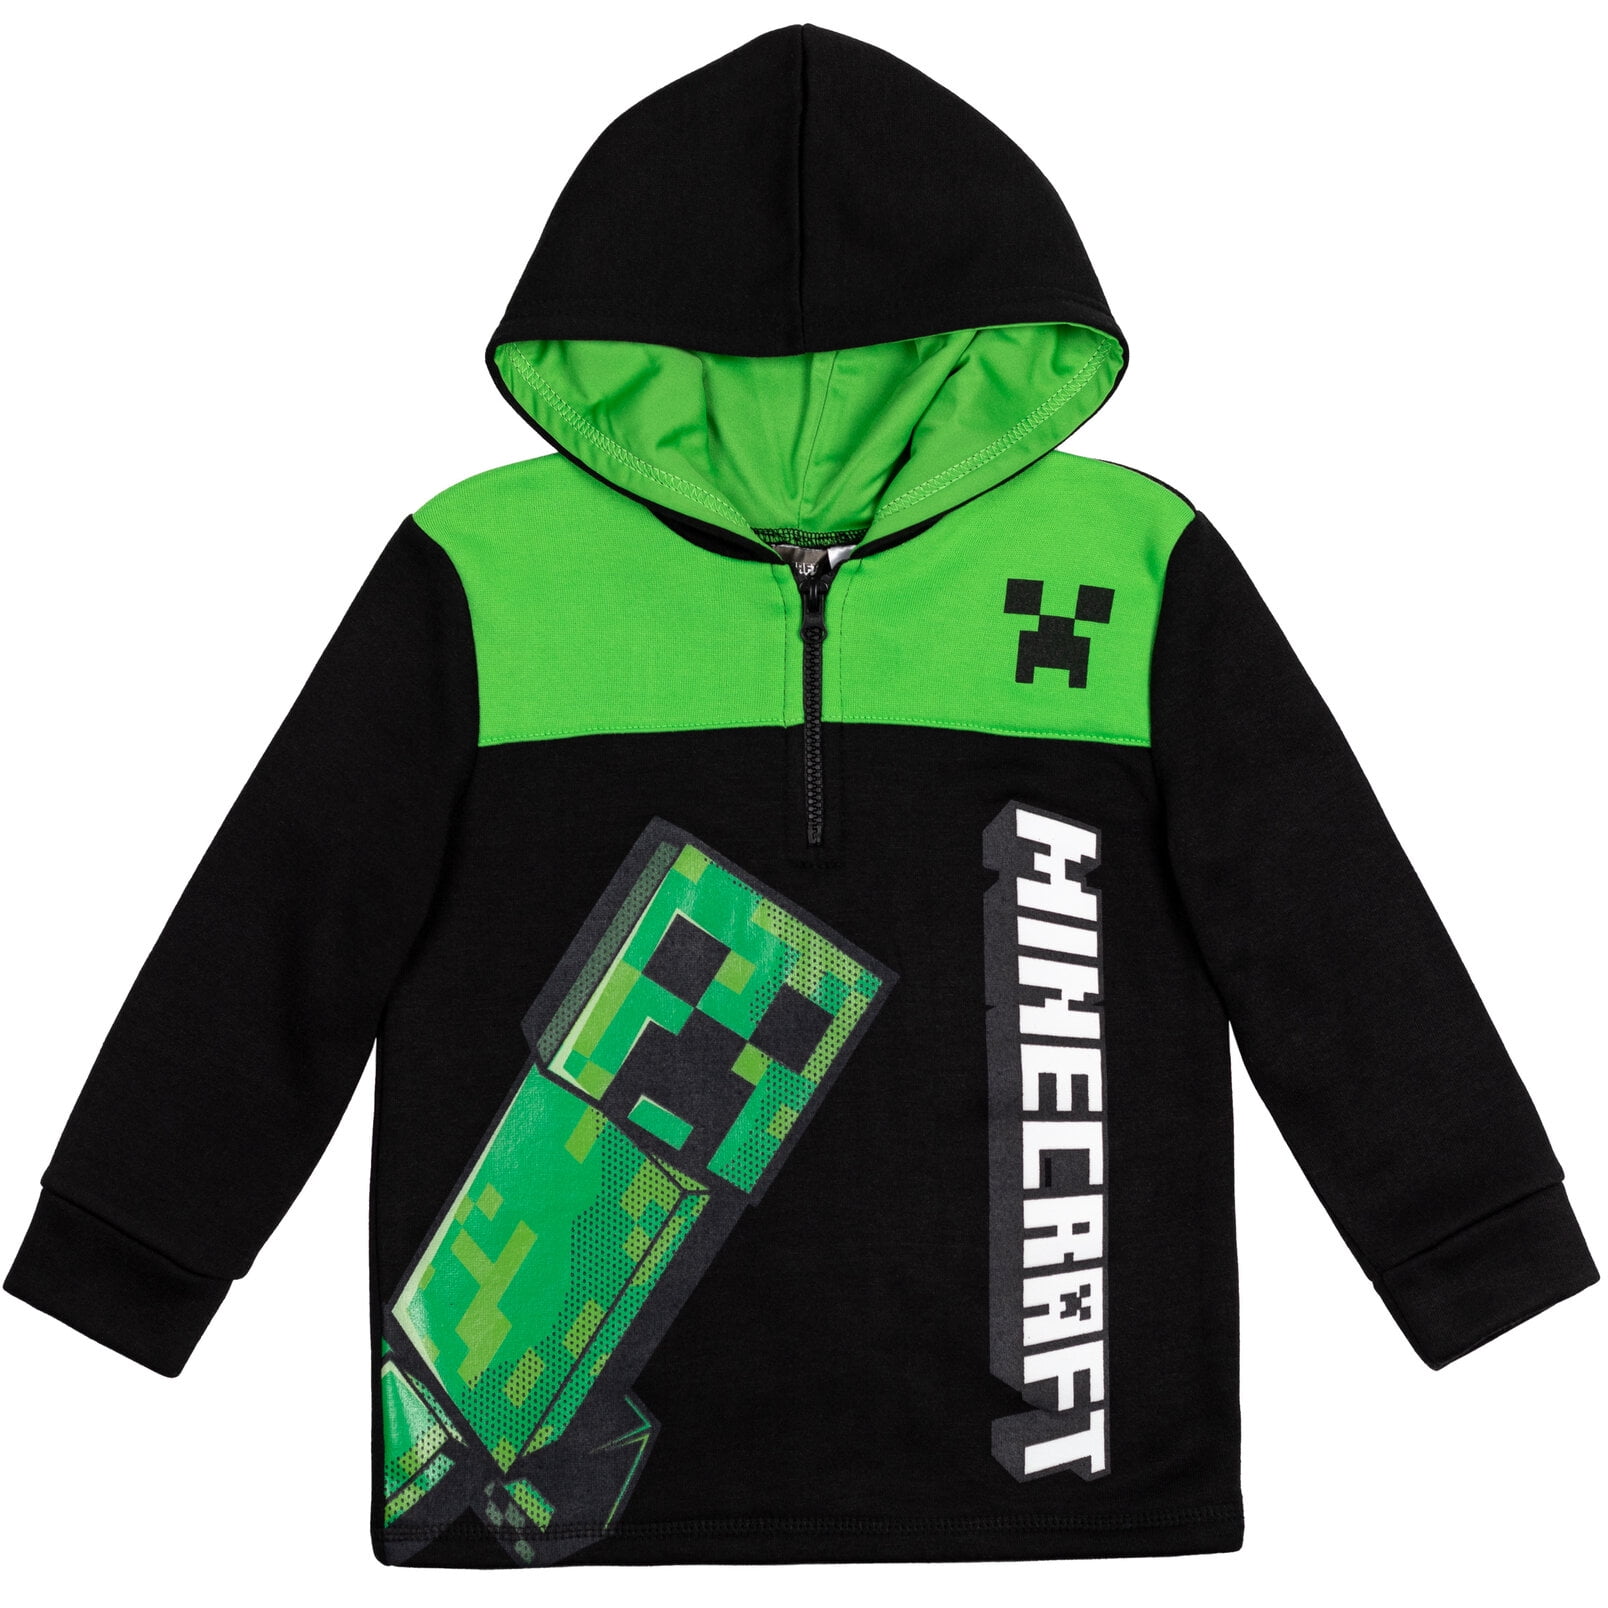 Minecraft Boys Video Game Hoodie Official Sweatshirt Black and Green Creeper Face